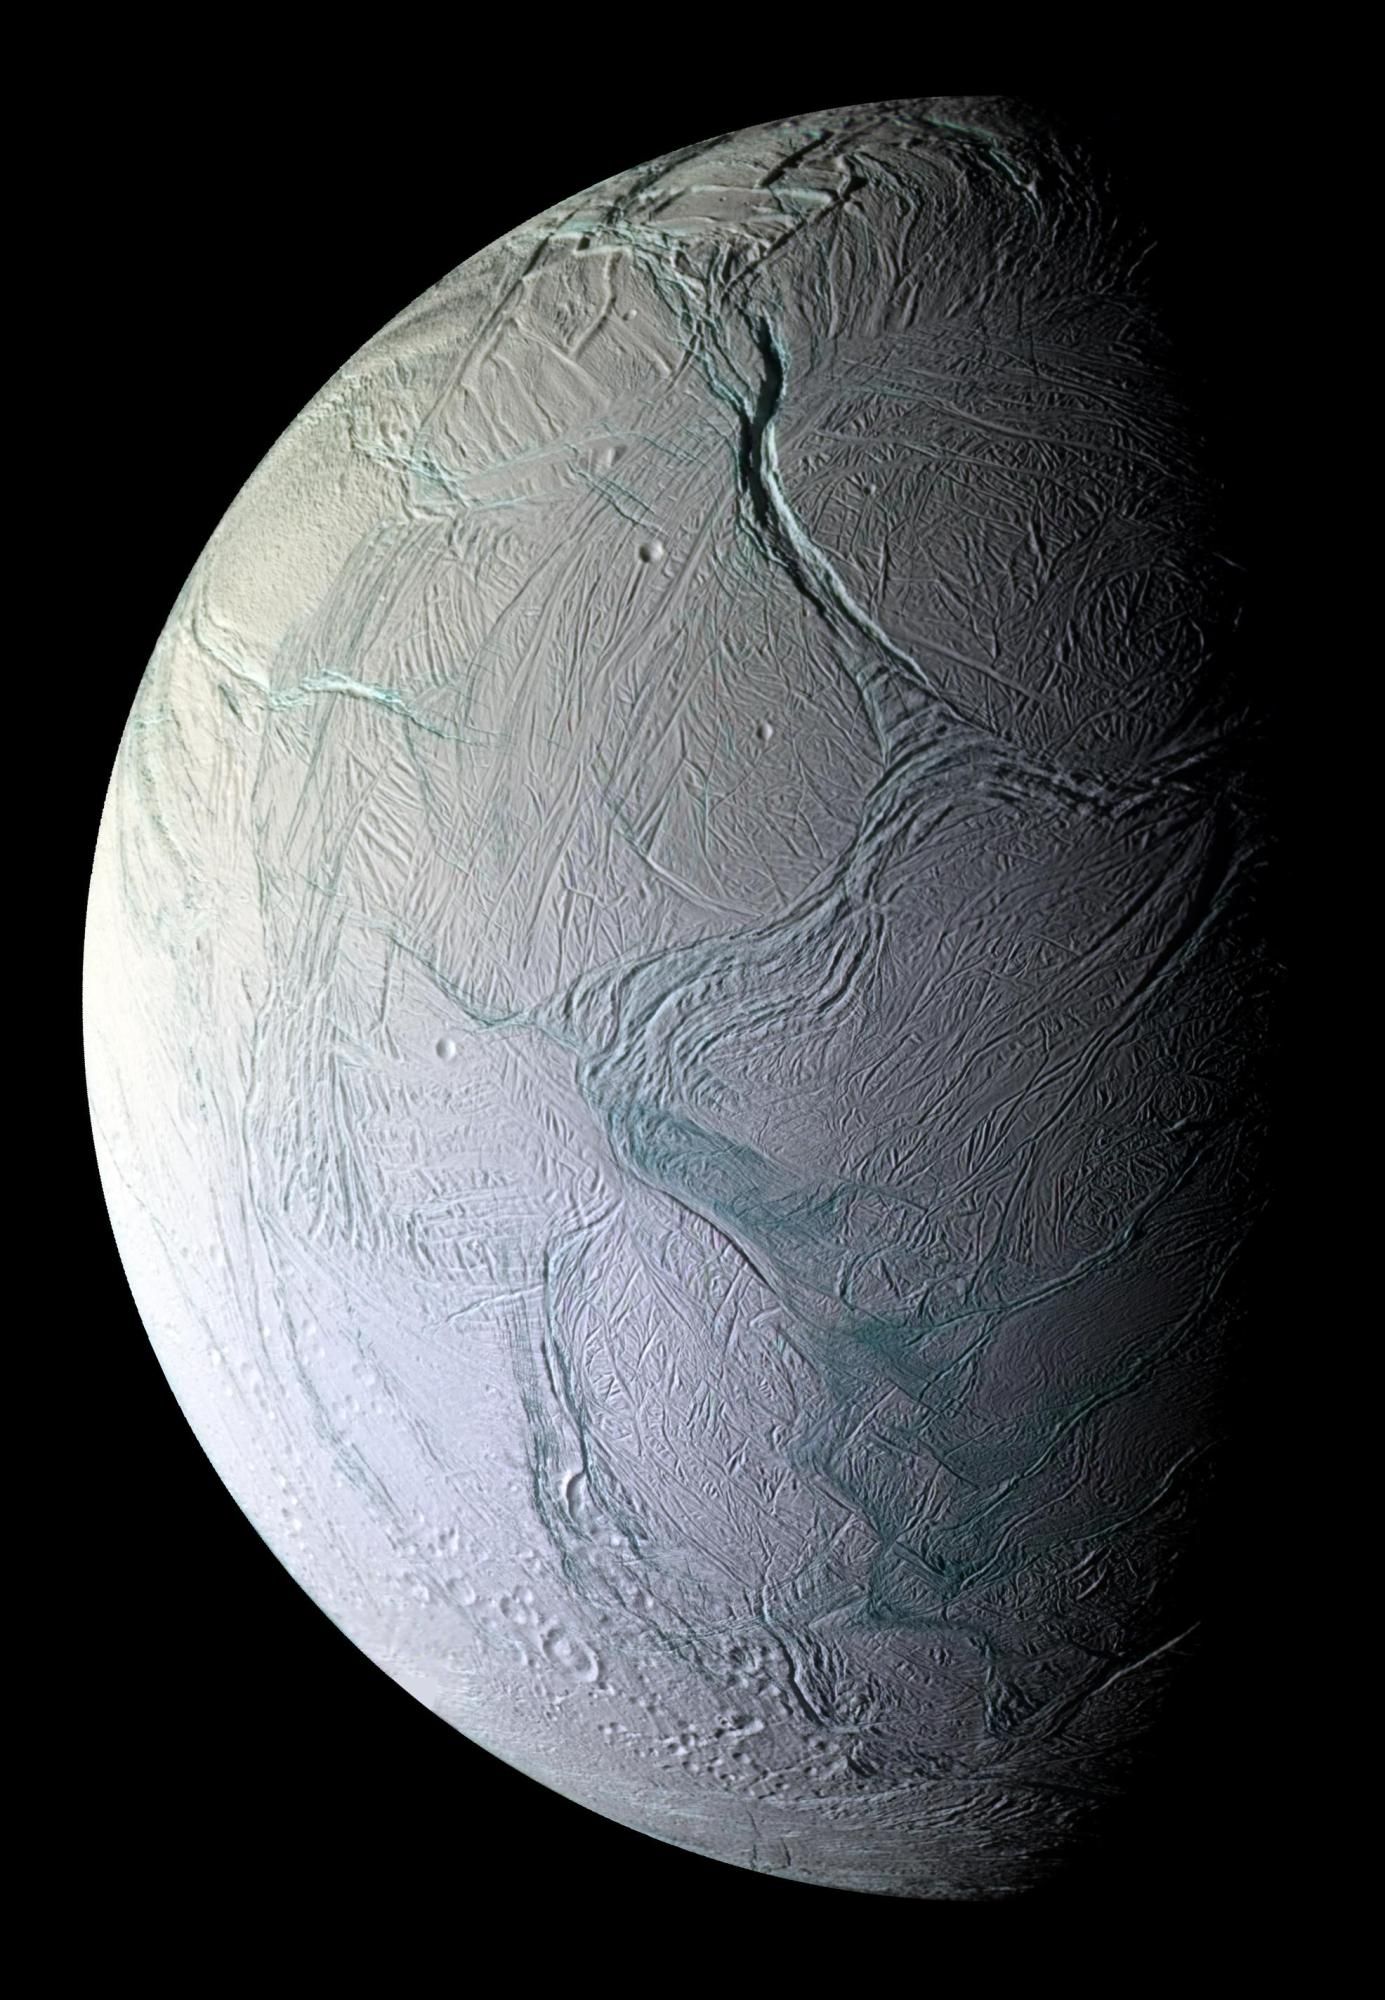 On Oct. 9, 2008, just after coming within 25 kilometers (15.6 miles) of the surface of Enceladus, NASA's Cassini captured this stunning mosaic as the spacecraft sped away from this geologically active moon of Saturn.